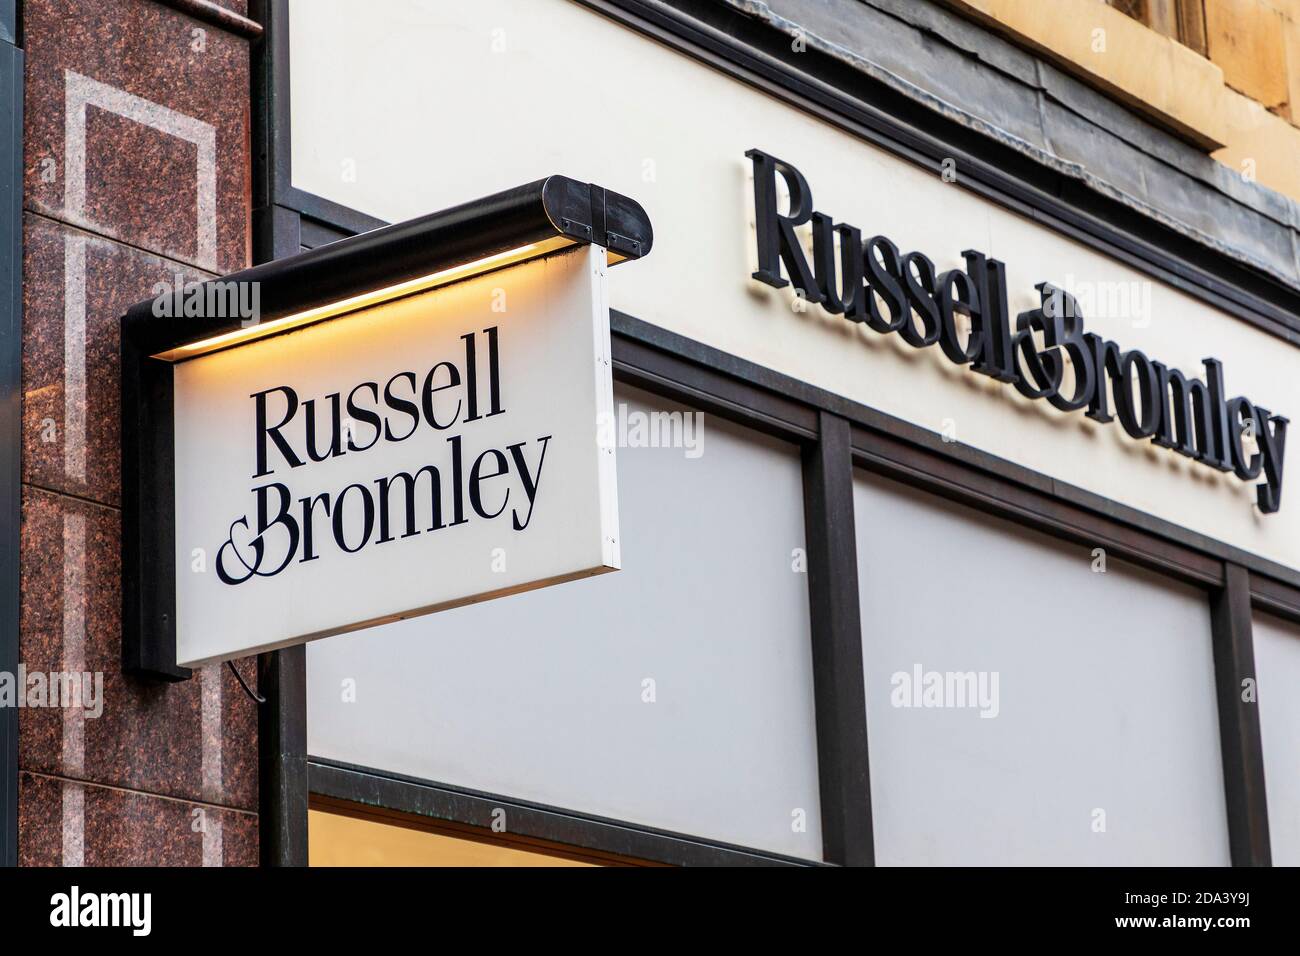 russell and bromley shoes uk